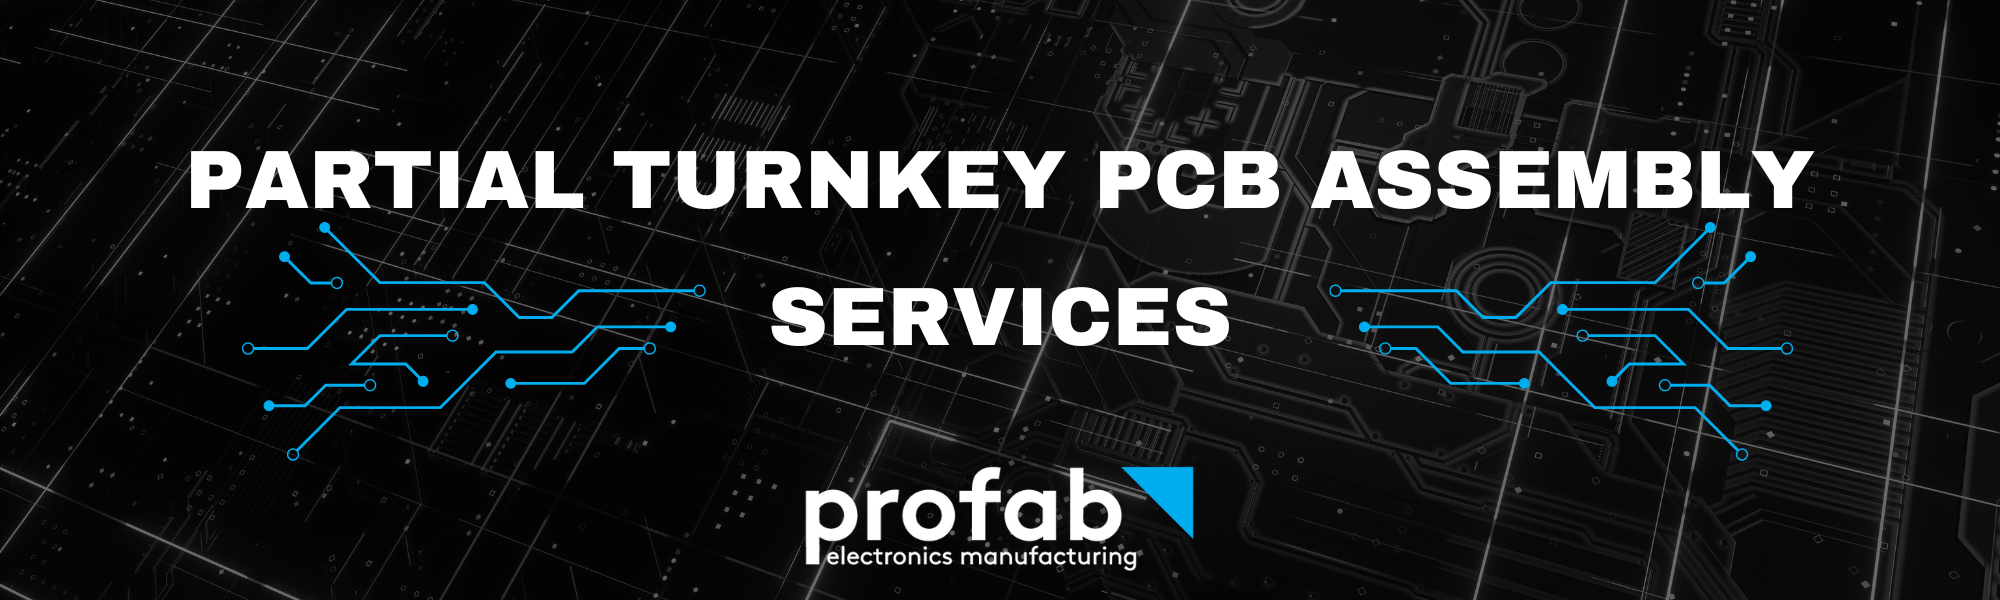 Partial Turnkey PCB Assembly Services